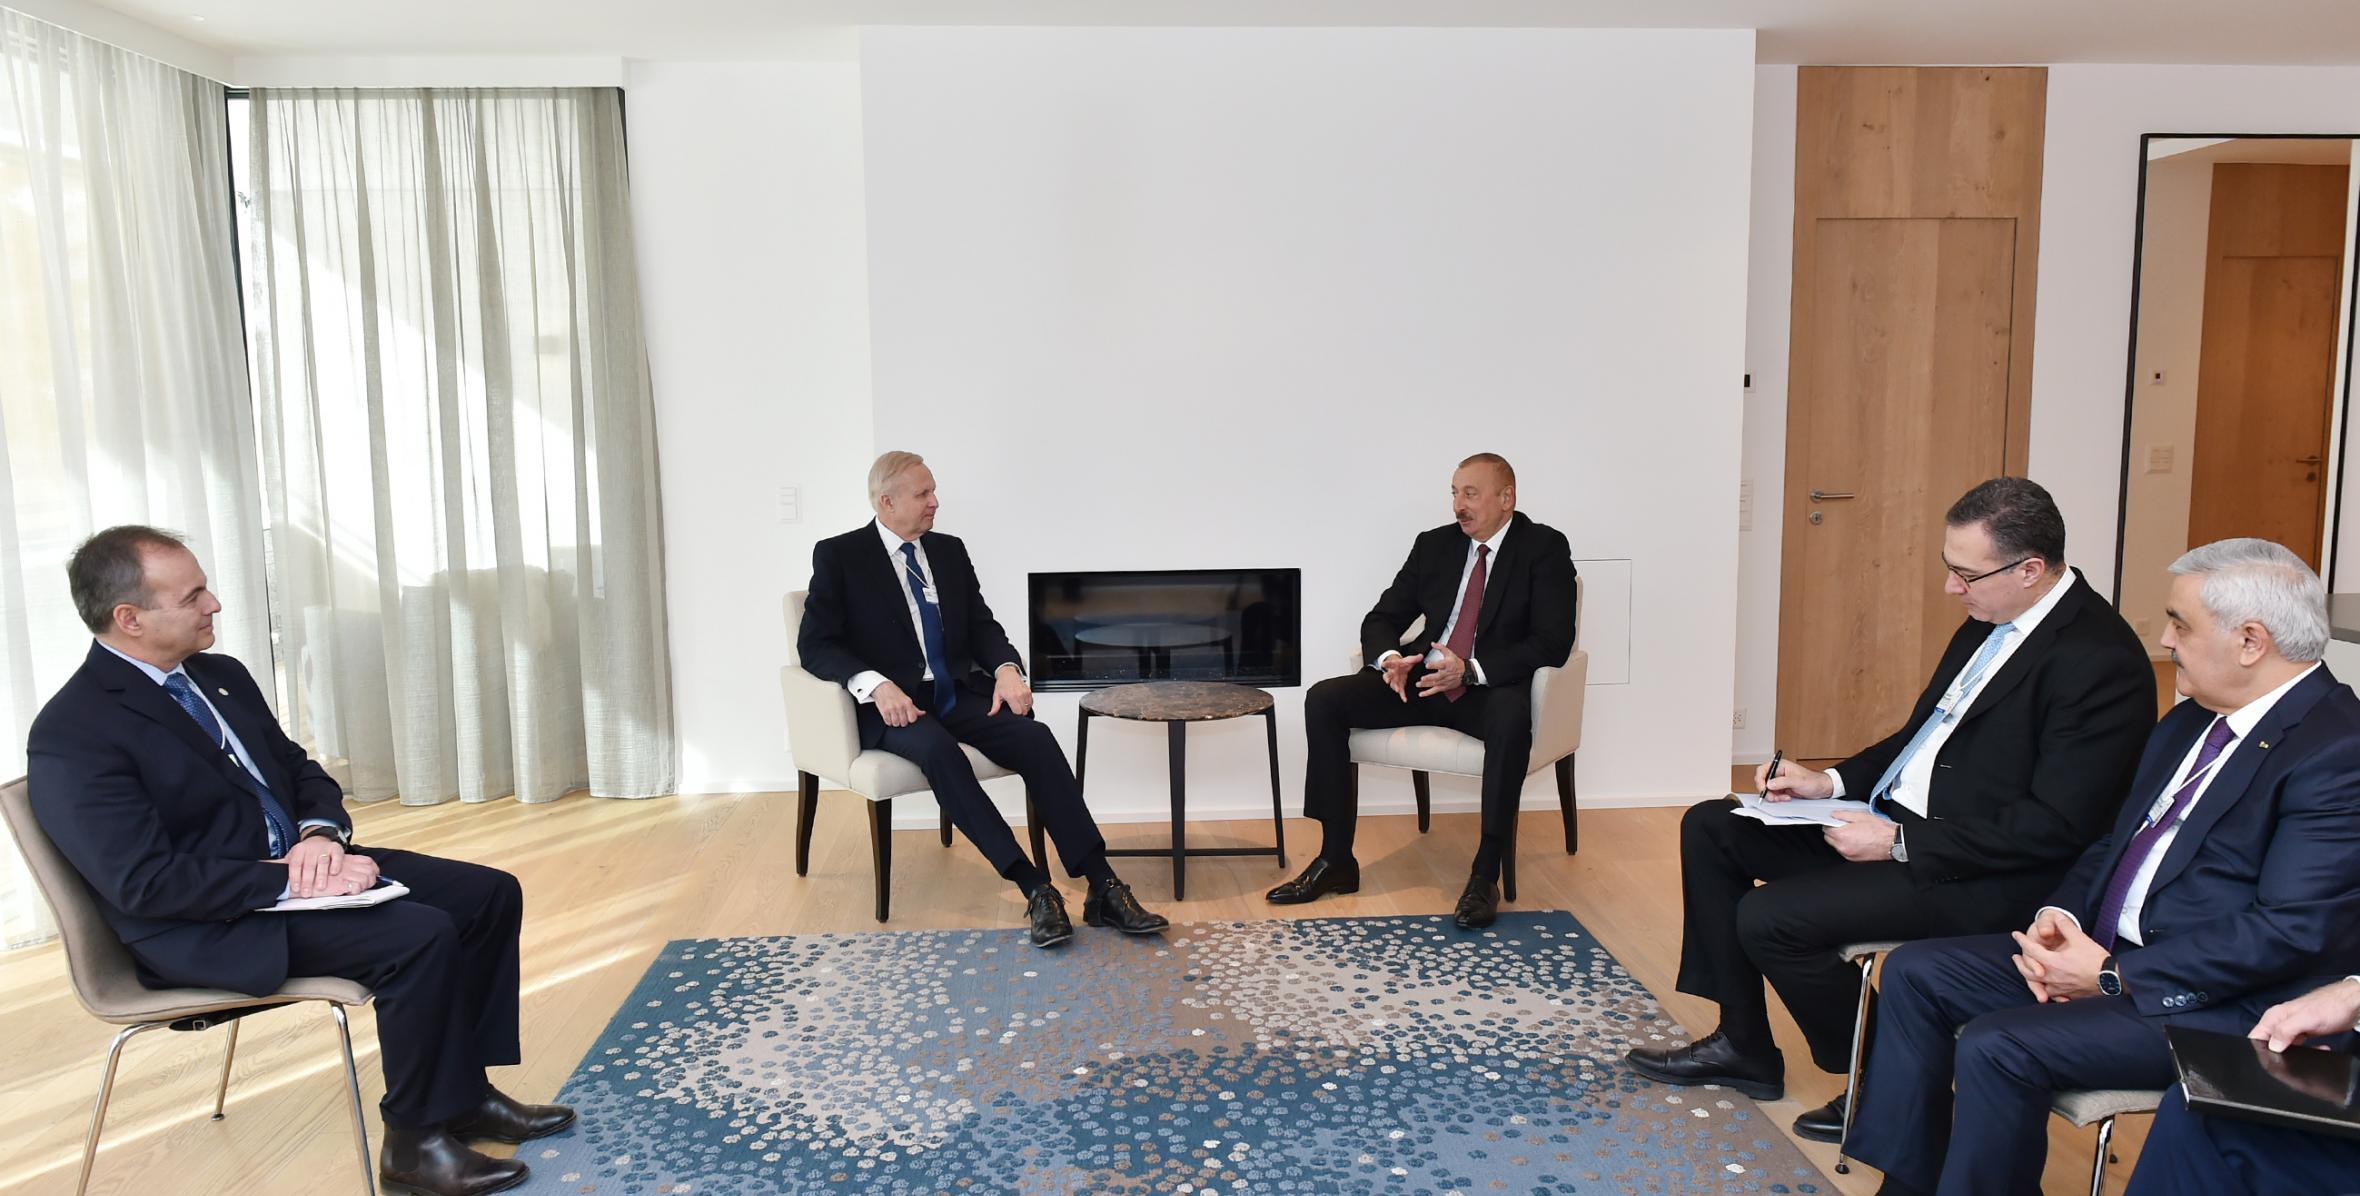 Ilham Aliyev met with BP Chief Executive Officer in Davos